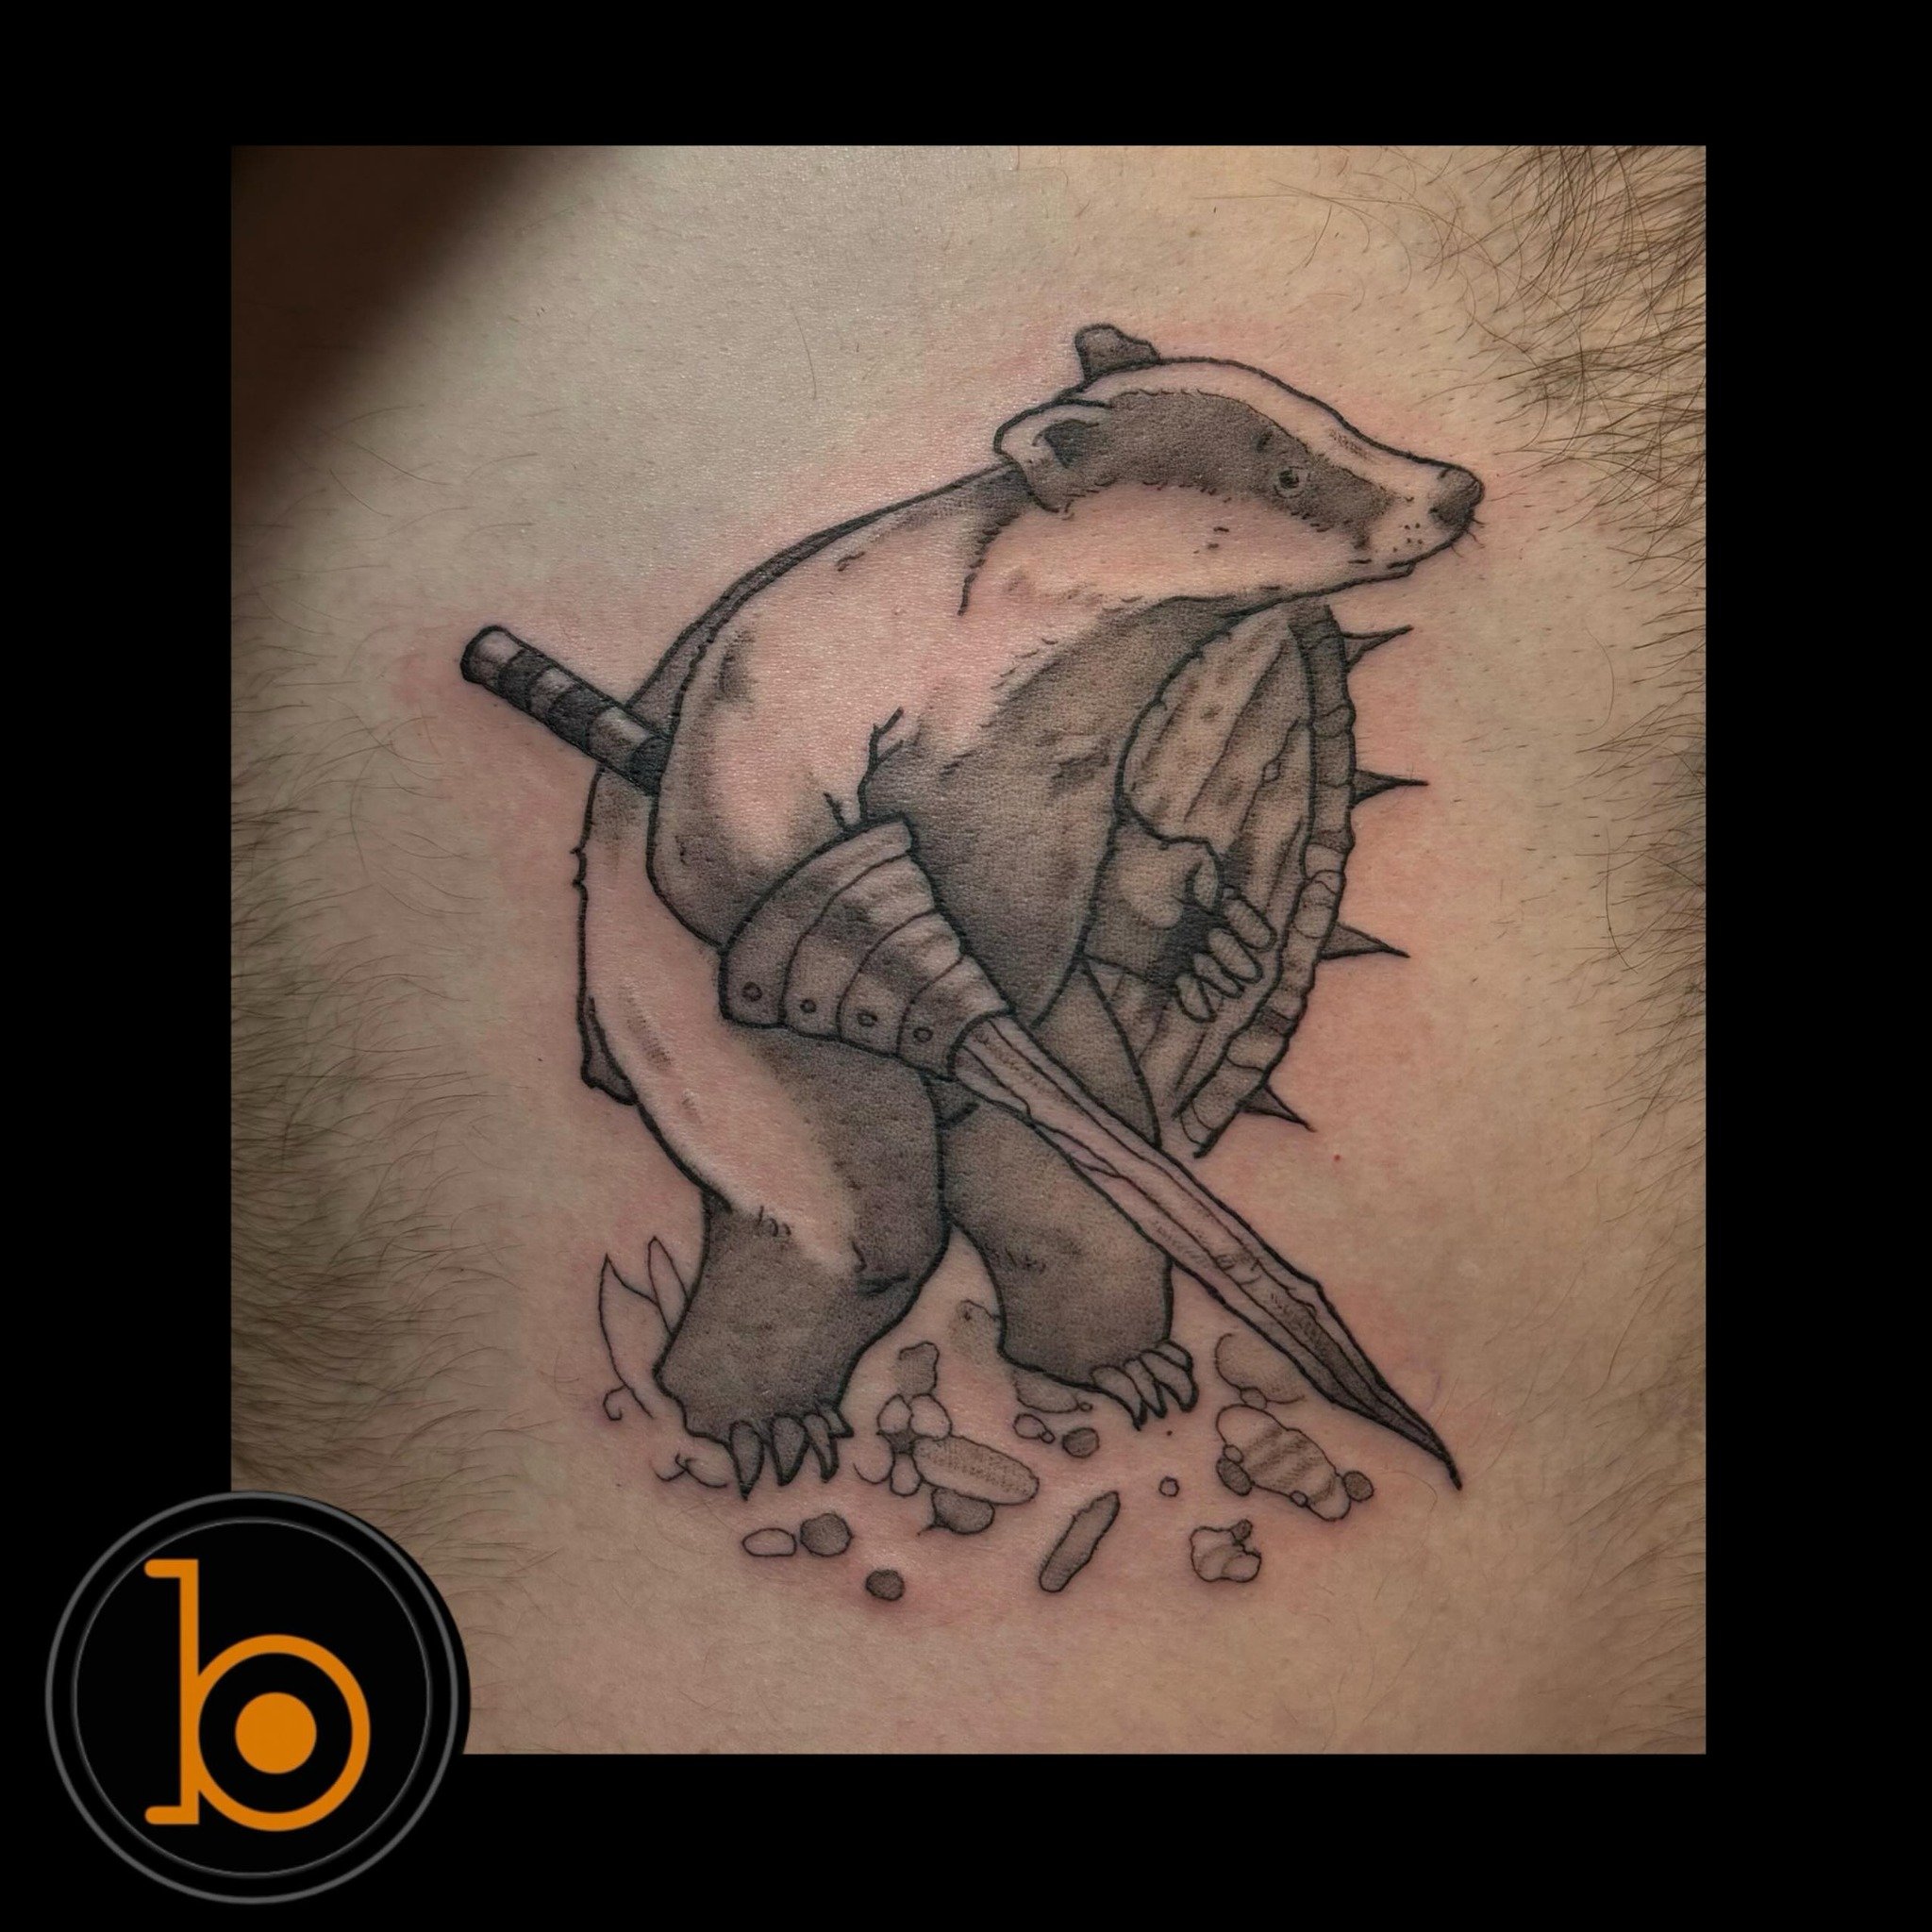 The kind of enemy you&rsquo;d lay your weapon down for&hellip; by resident artist @rick.beaupre 🦡⚔️
➖➖➖➖➖➖➖➖➖➖➖➖➖➖➖➖➖
Blueprint Gallery
138 Russell St
 Hadley MA 01035
📱(413)-387-0221 
WALK-INS WELCOME 
🕸️ www.blueprintgallery.com 🕸️
⬇️⬇️⬇️⬇️⬇️⬇️